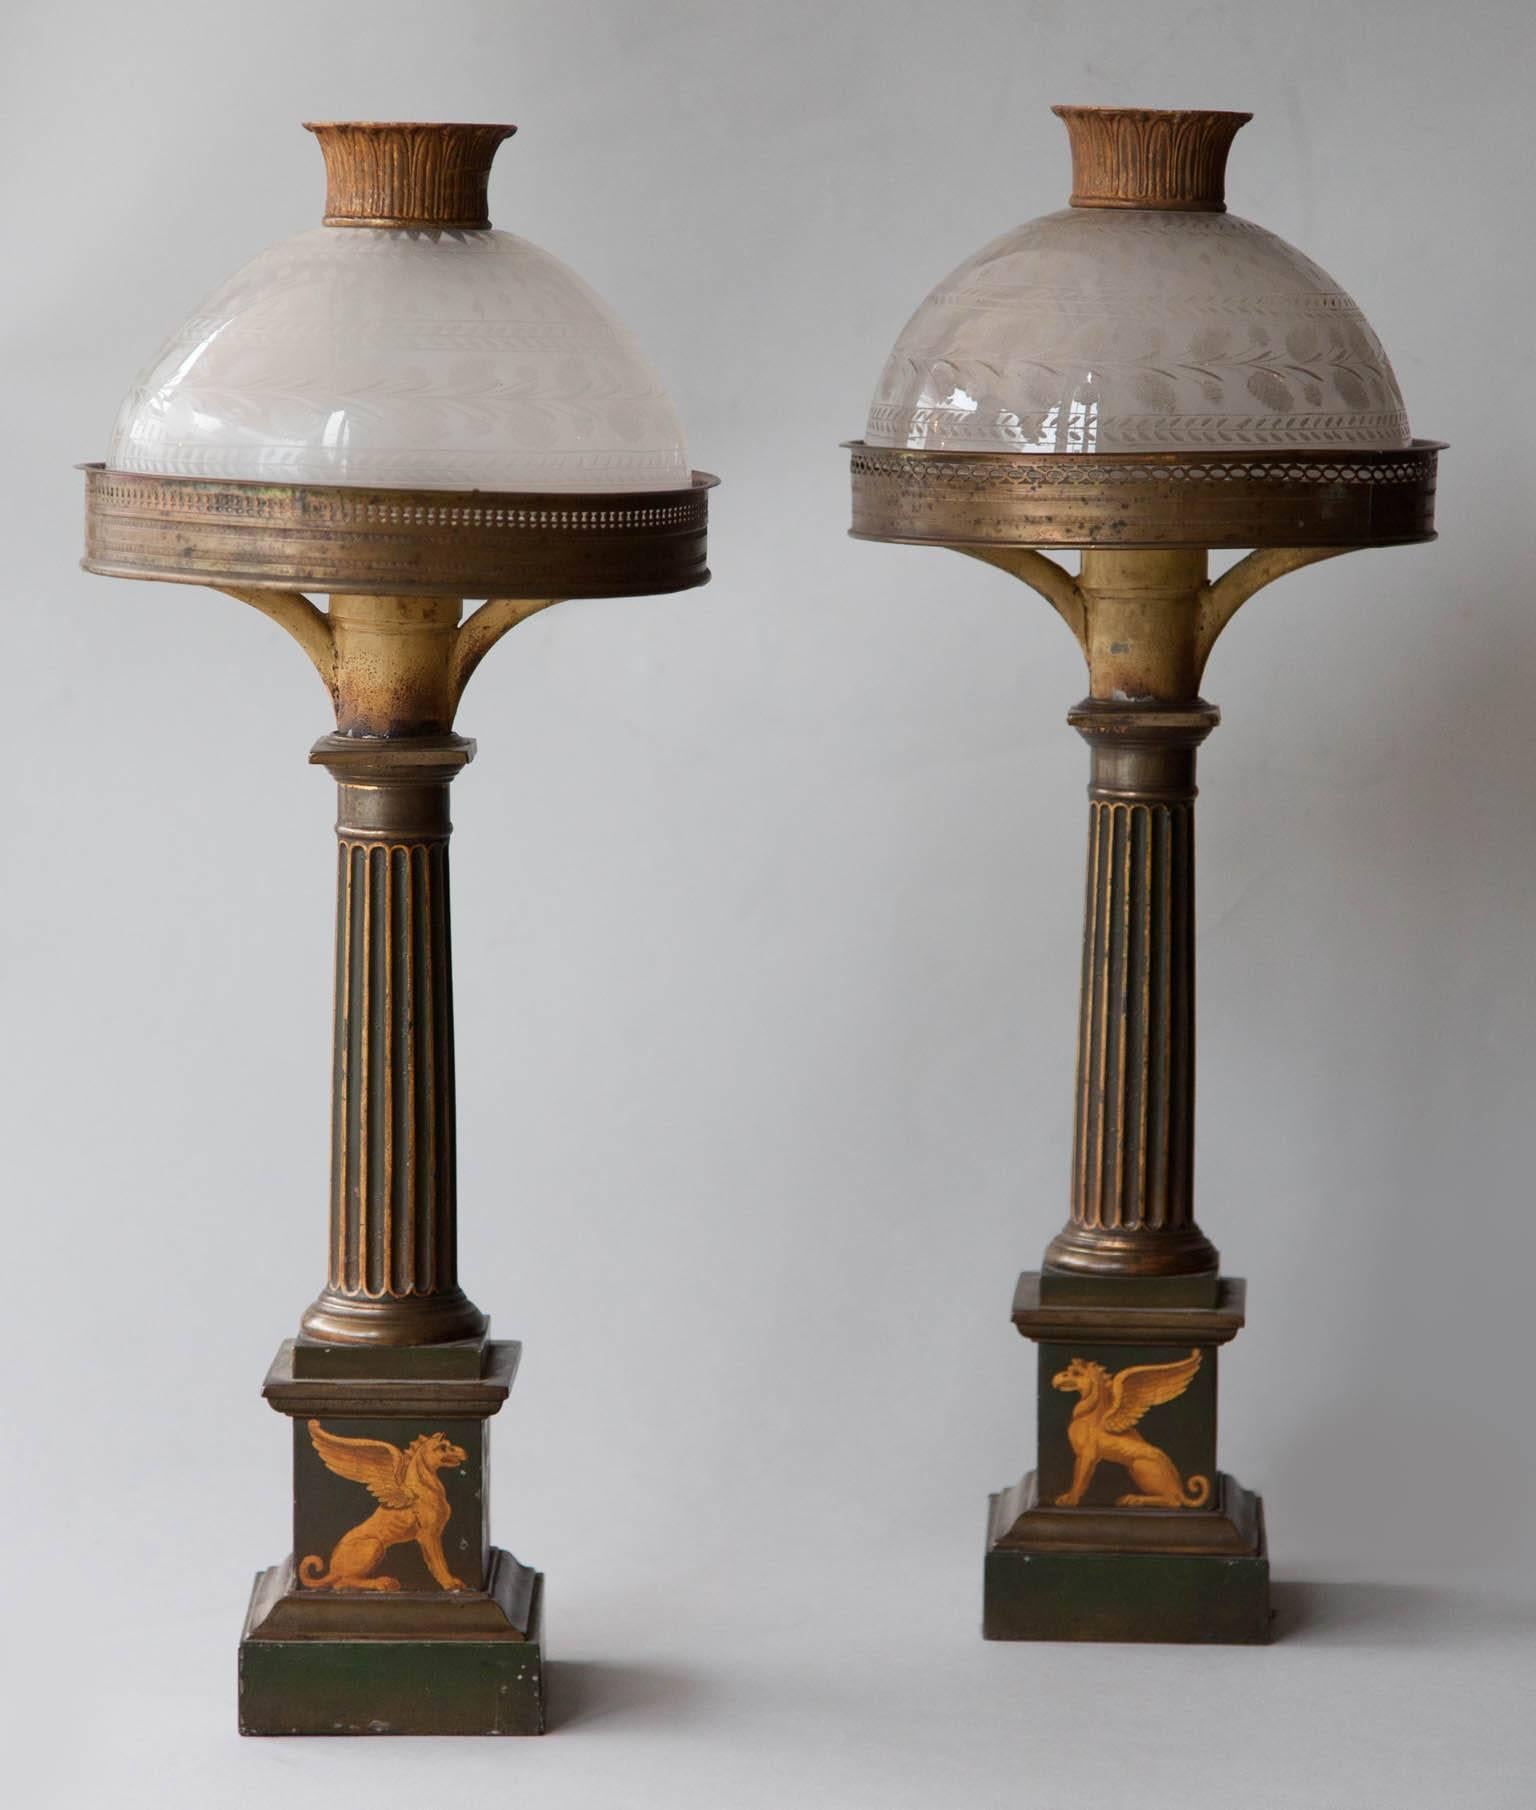 Early 19th century French Carcel table lamps with sin umbra shades, fluted columns on rectangular plinth bases. Decorated in gold with painted Griffins and Poppies.
Acid etched glass shades, one is a replacement.
Currently electrified for the